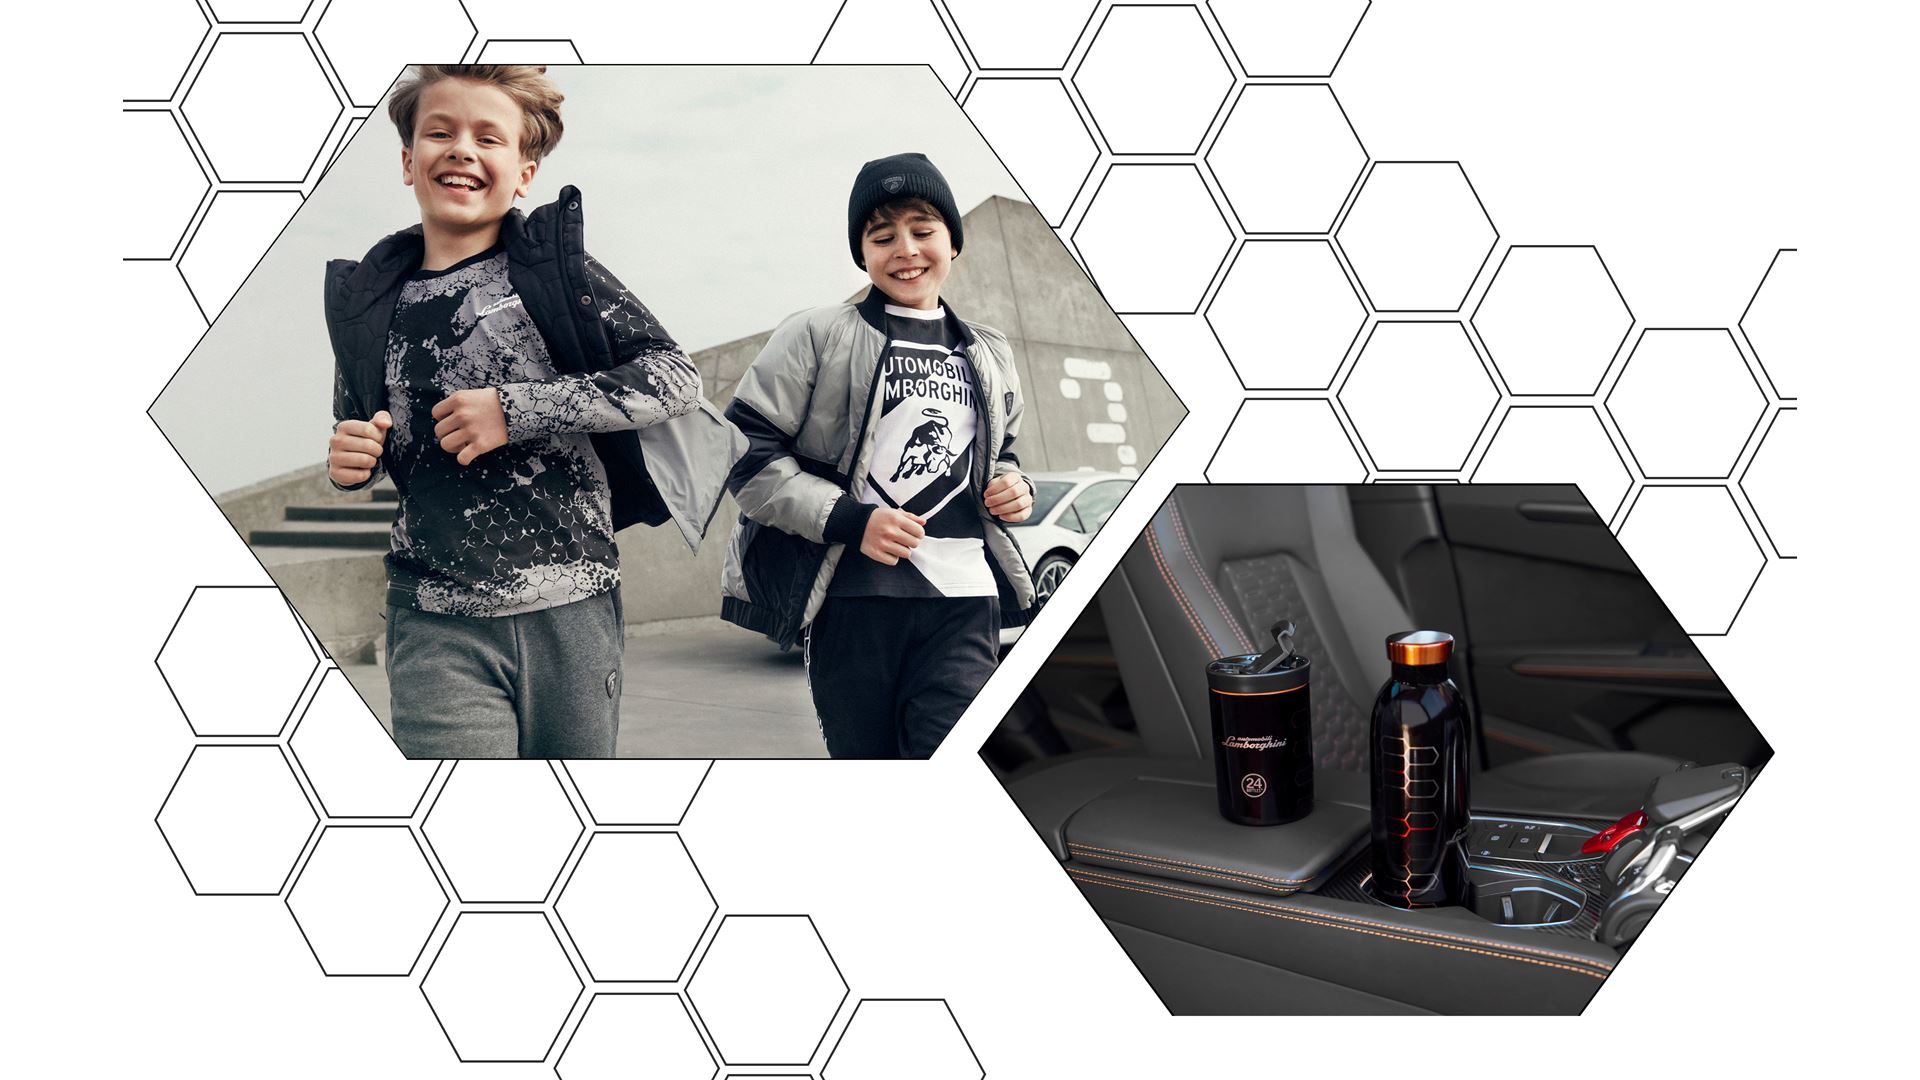 Automobili Lamborghini at Pitti Immagine Uomo e Bambino - The Kidswear Fall-Winter 2022-23 collection and the new Special Edition with 24Bottles on display - Image 1